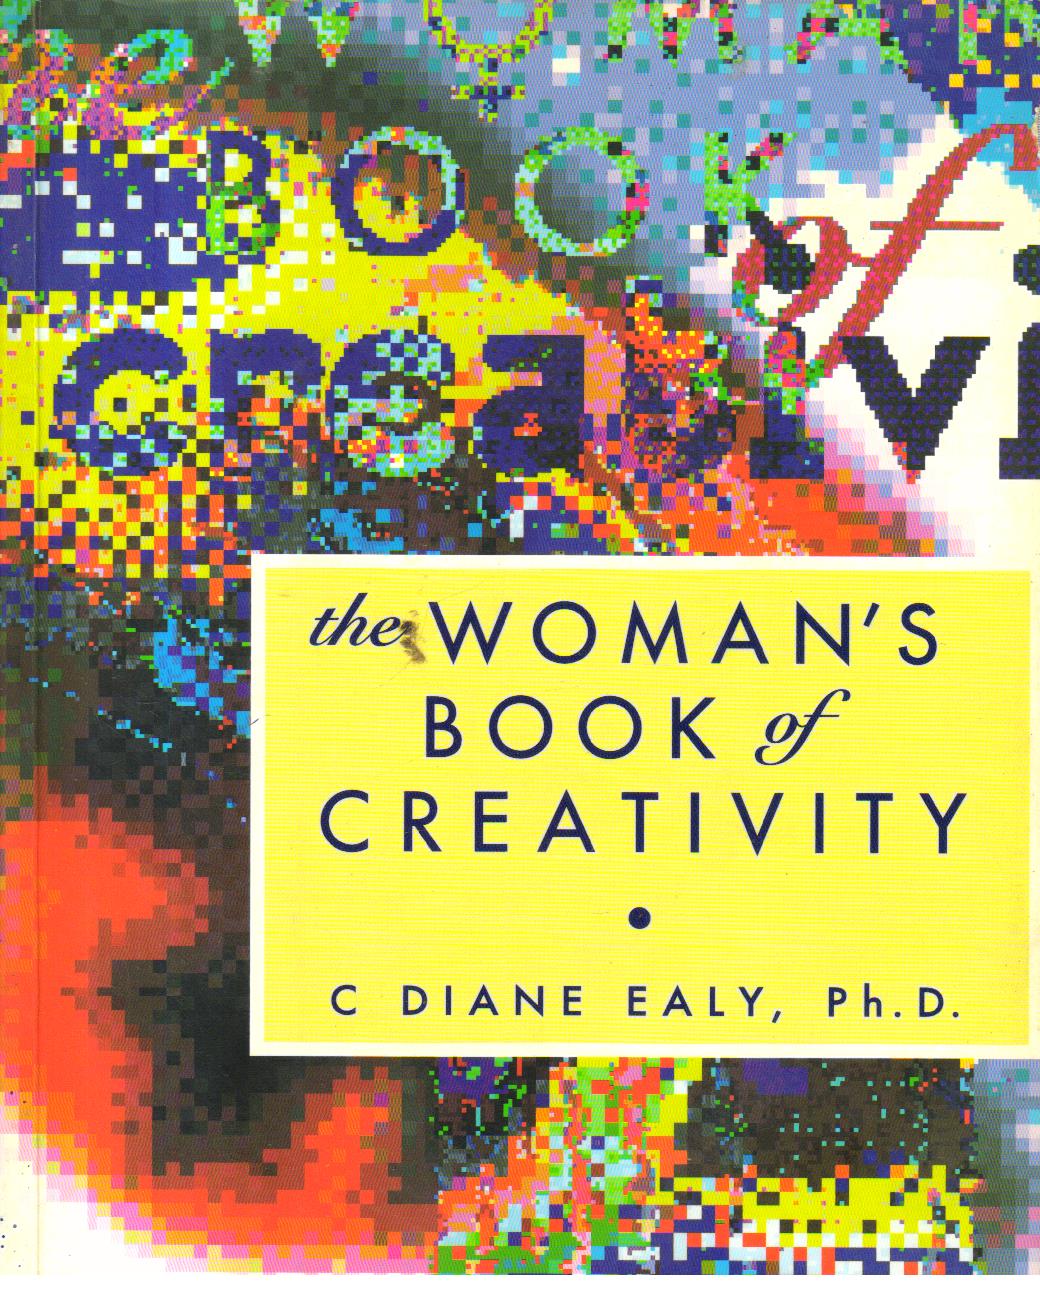 The Woman's Book of Creativity.